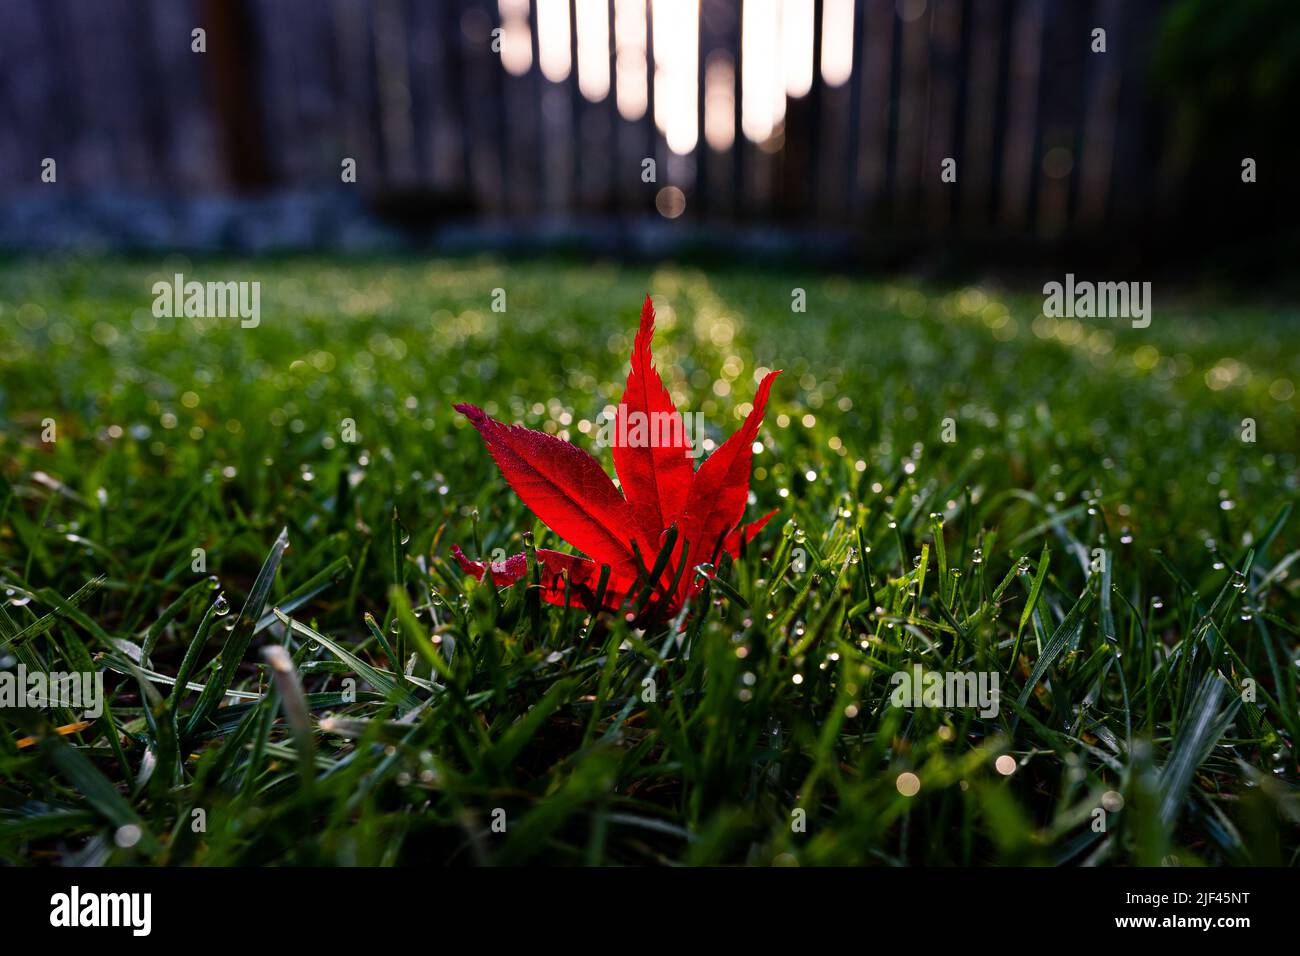 An autumn red leaf on the grass Stock Photo